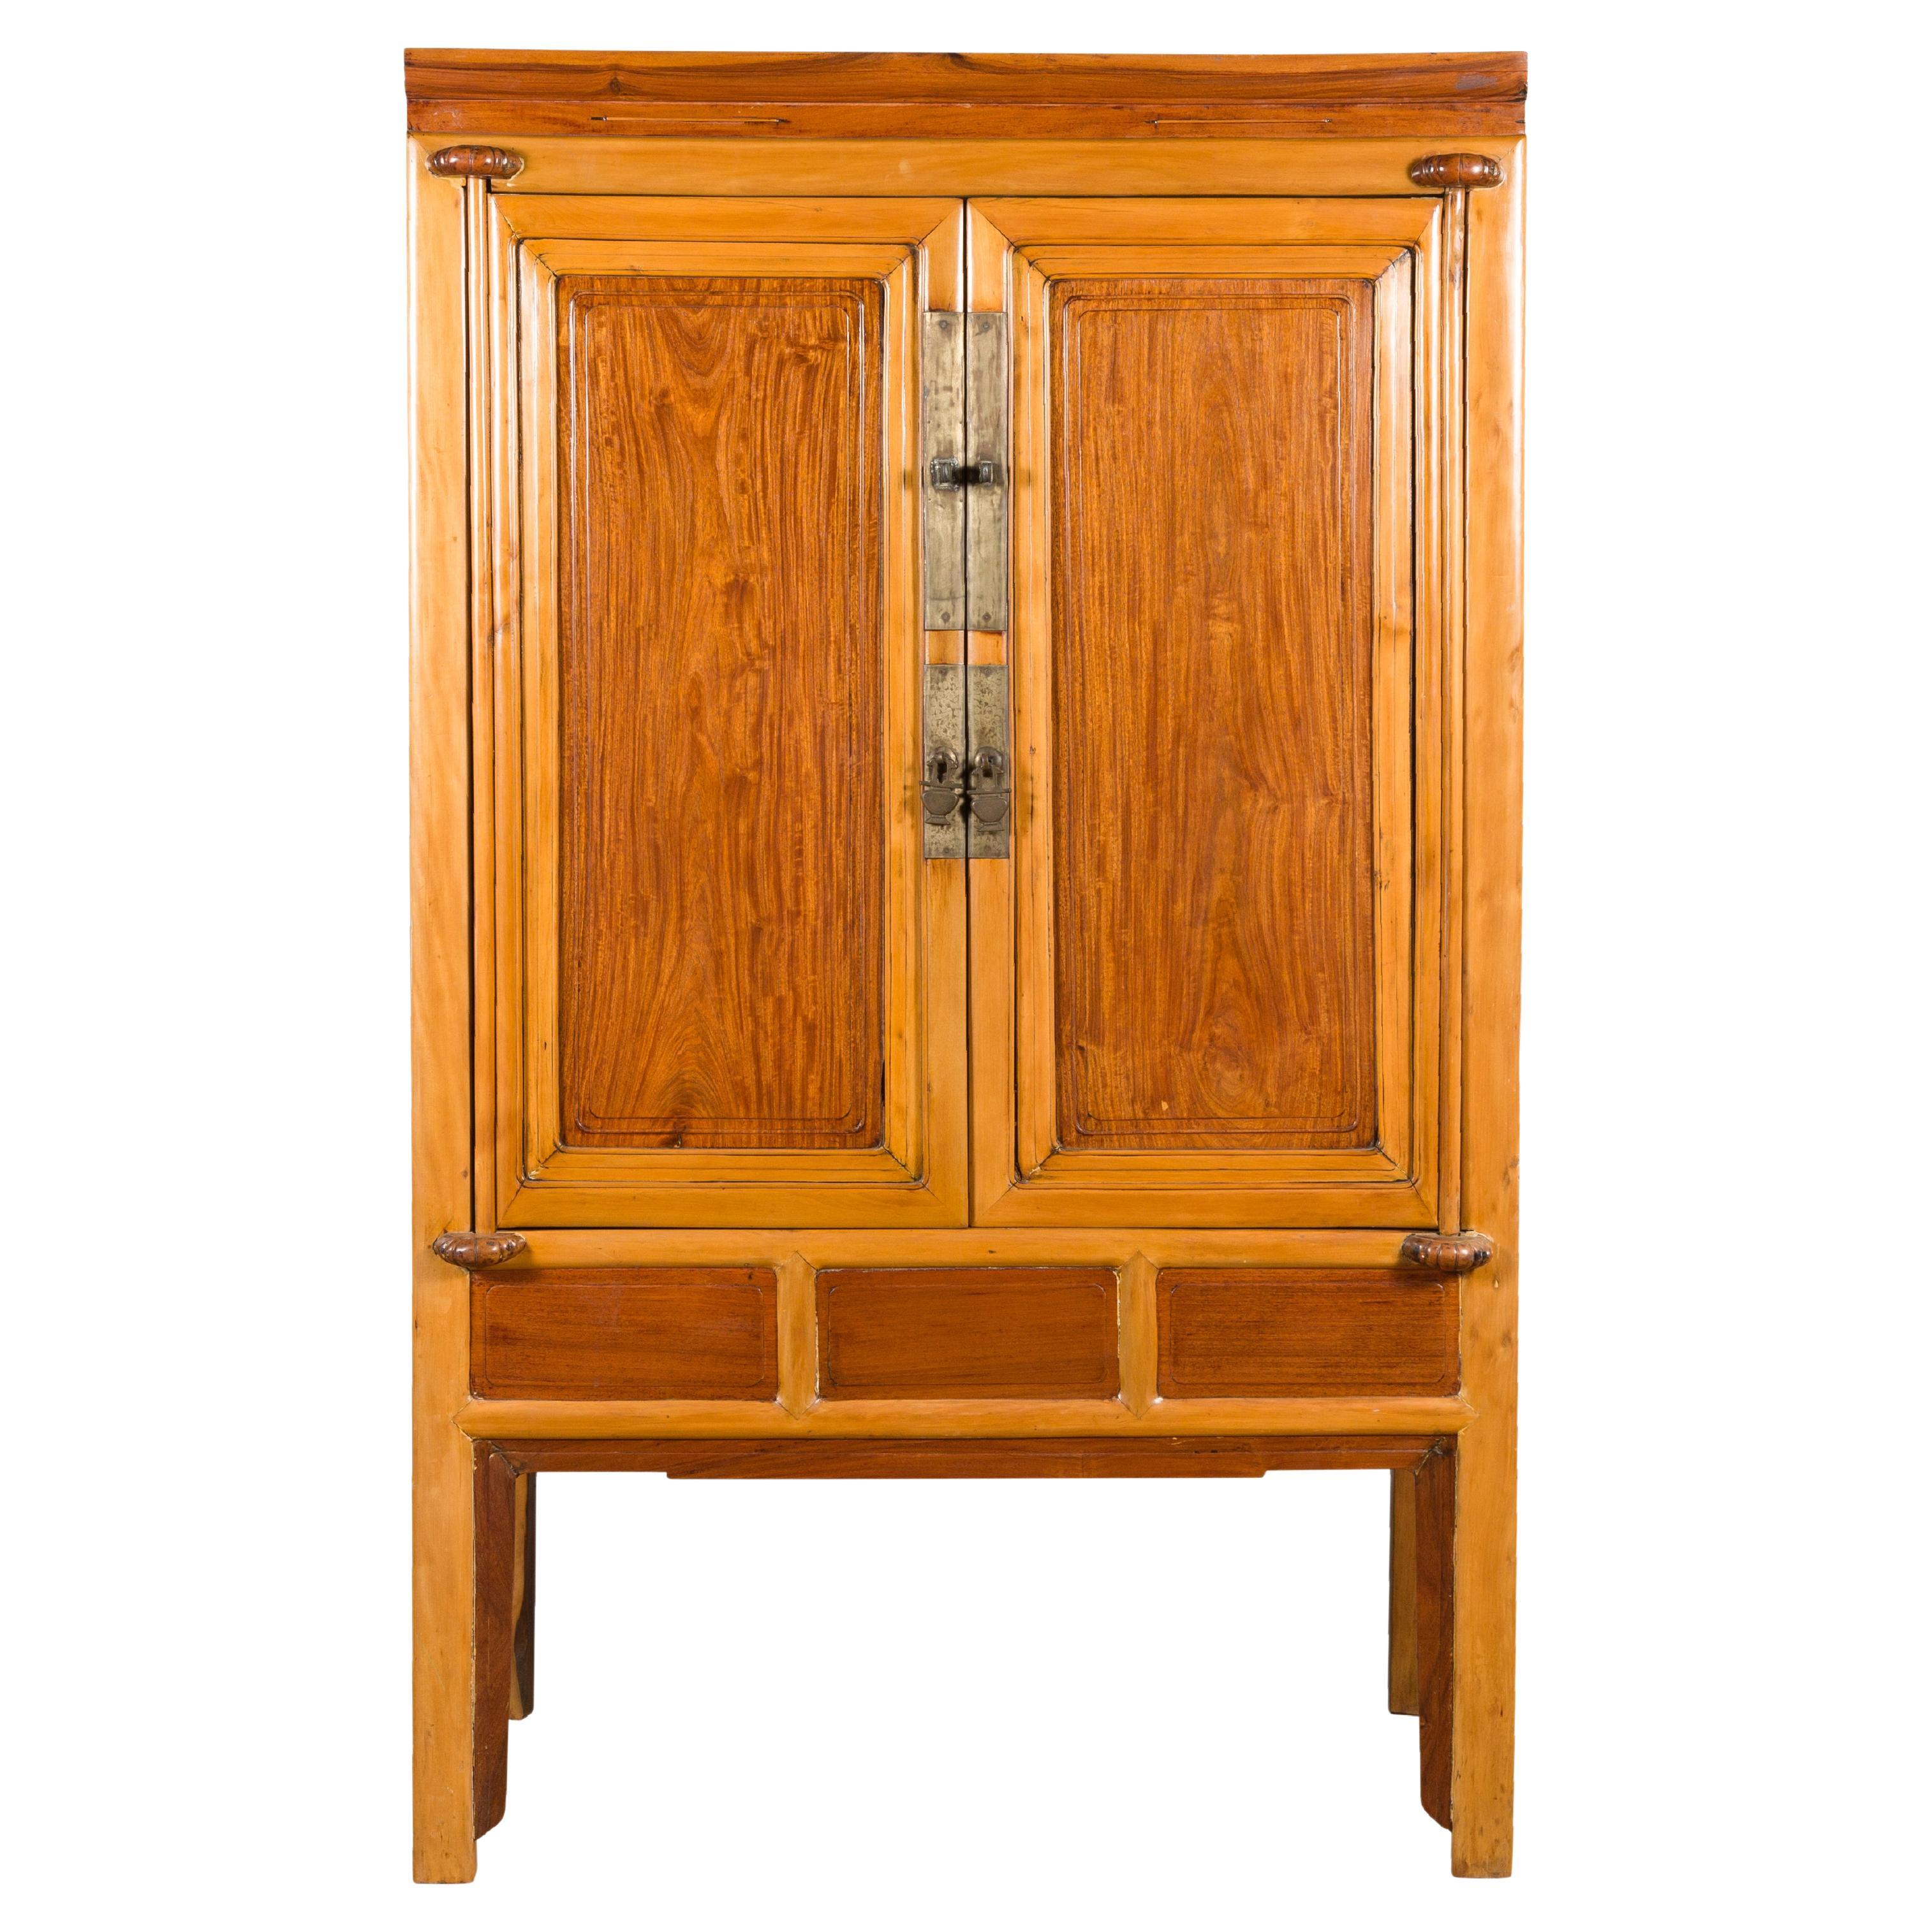 Chinese Qing Dynasty Ningbo Cypress and Rosewood Cabinet with Brass Hardware